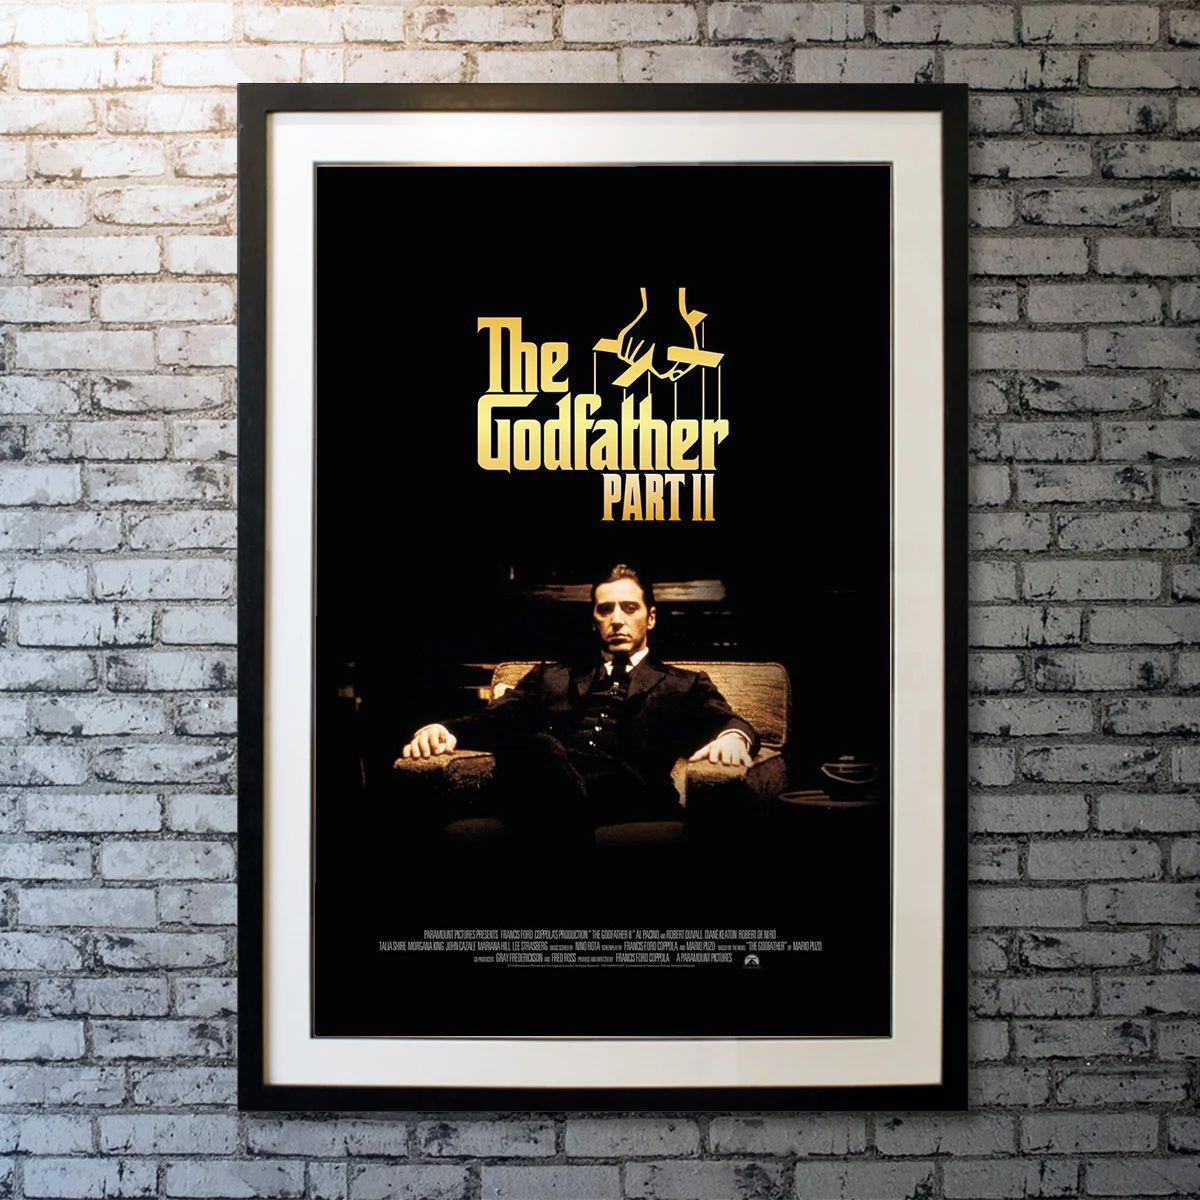 The Godfather: Part II Unframed Poster, 2022r

The early life and career of Vito Corleone in 1920s New York City is portrayed, while his son, Michael, expands and tightens his grip on the family crime syndicate. This once sheet is for the 50th